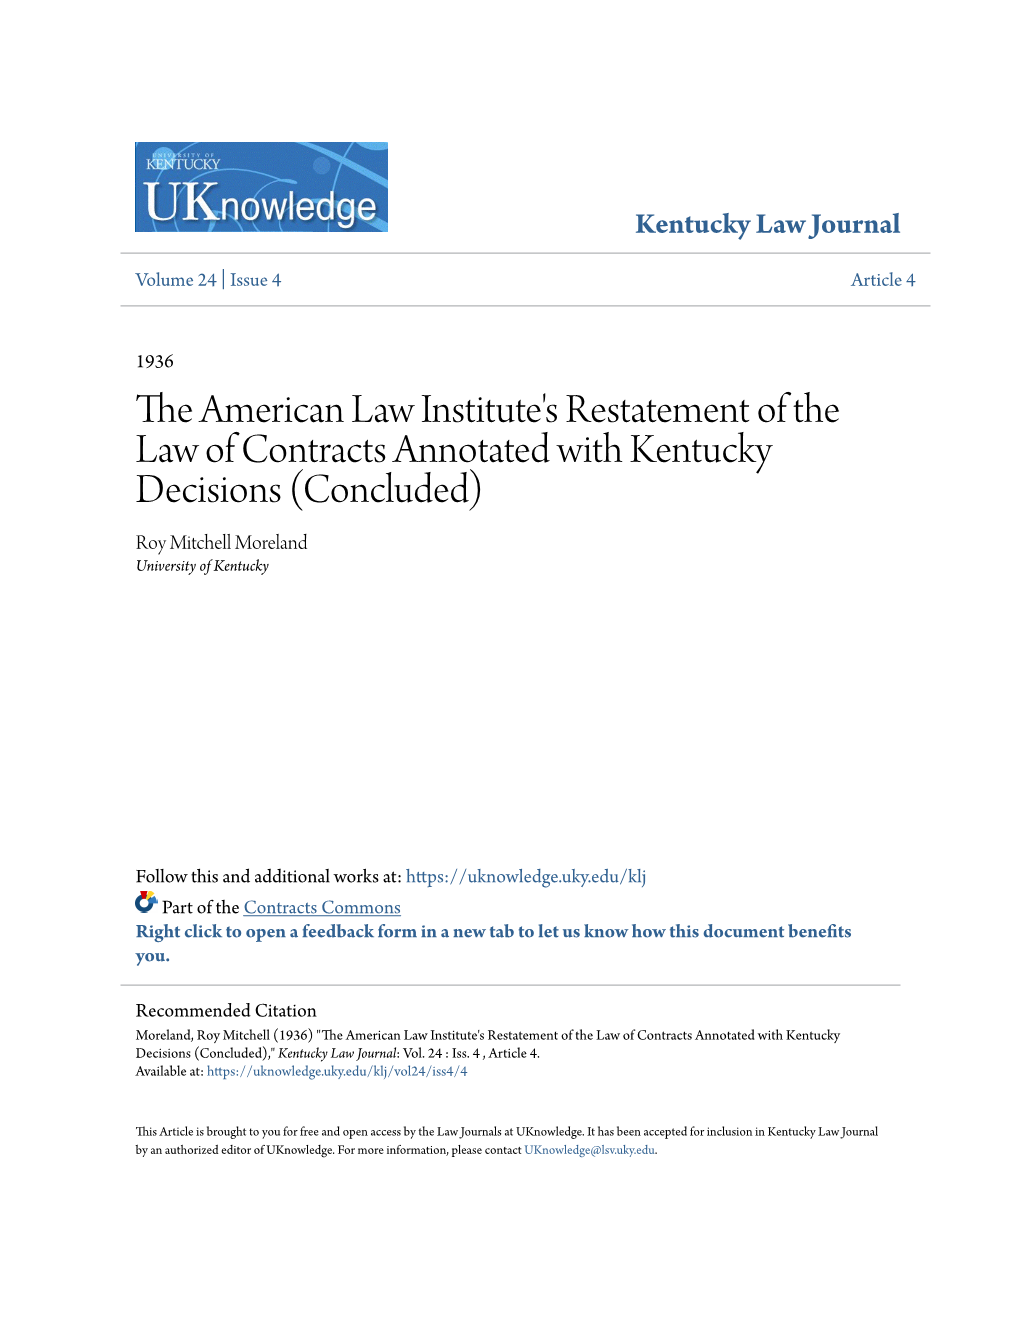 The American Law Institute's Restatement of the Law of Contracts Annotated with Kentucky Decisions (Concluded) Roy Mitchell Moreland University of Kentucky